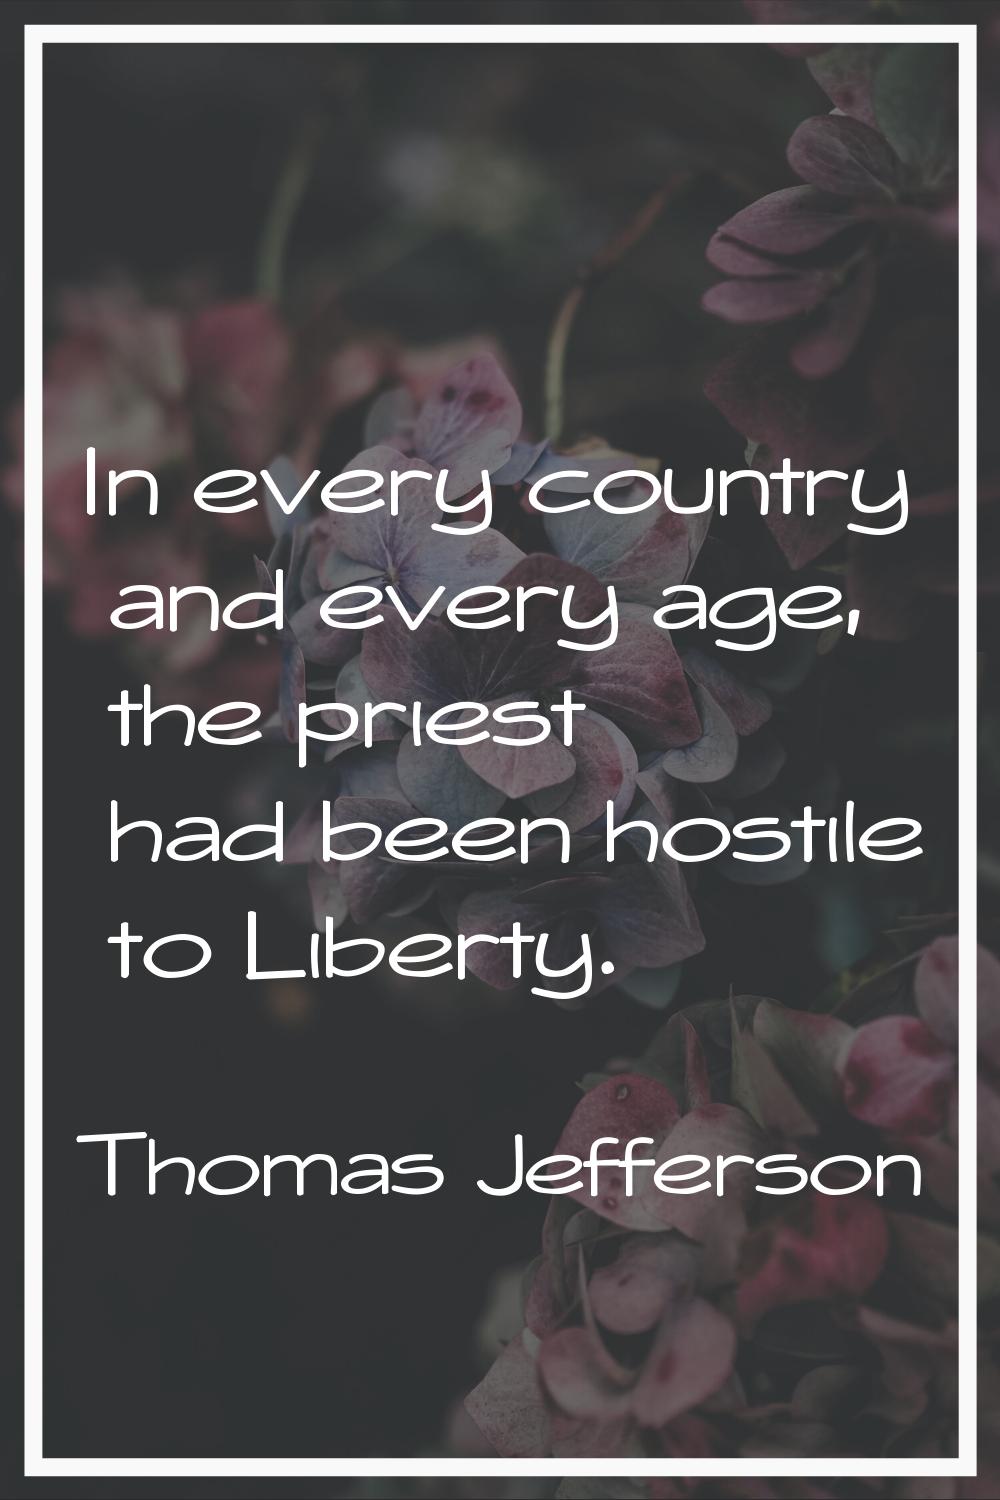 In every country and every age, the priest had been hostile to Liberty.